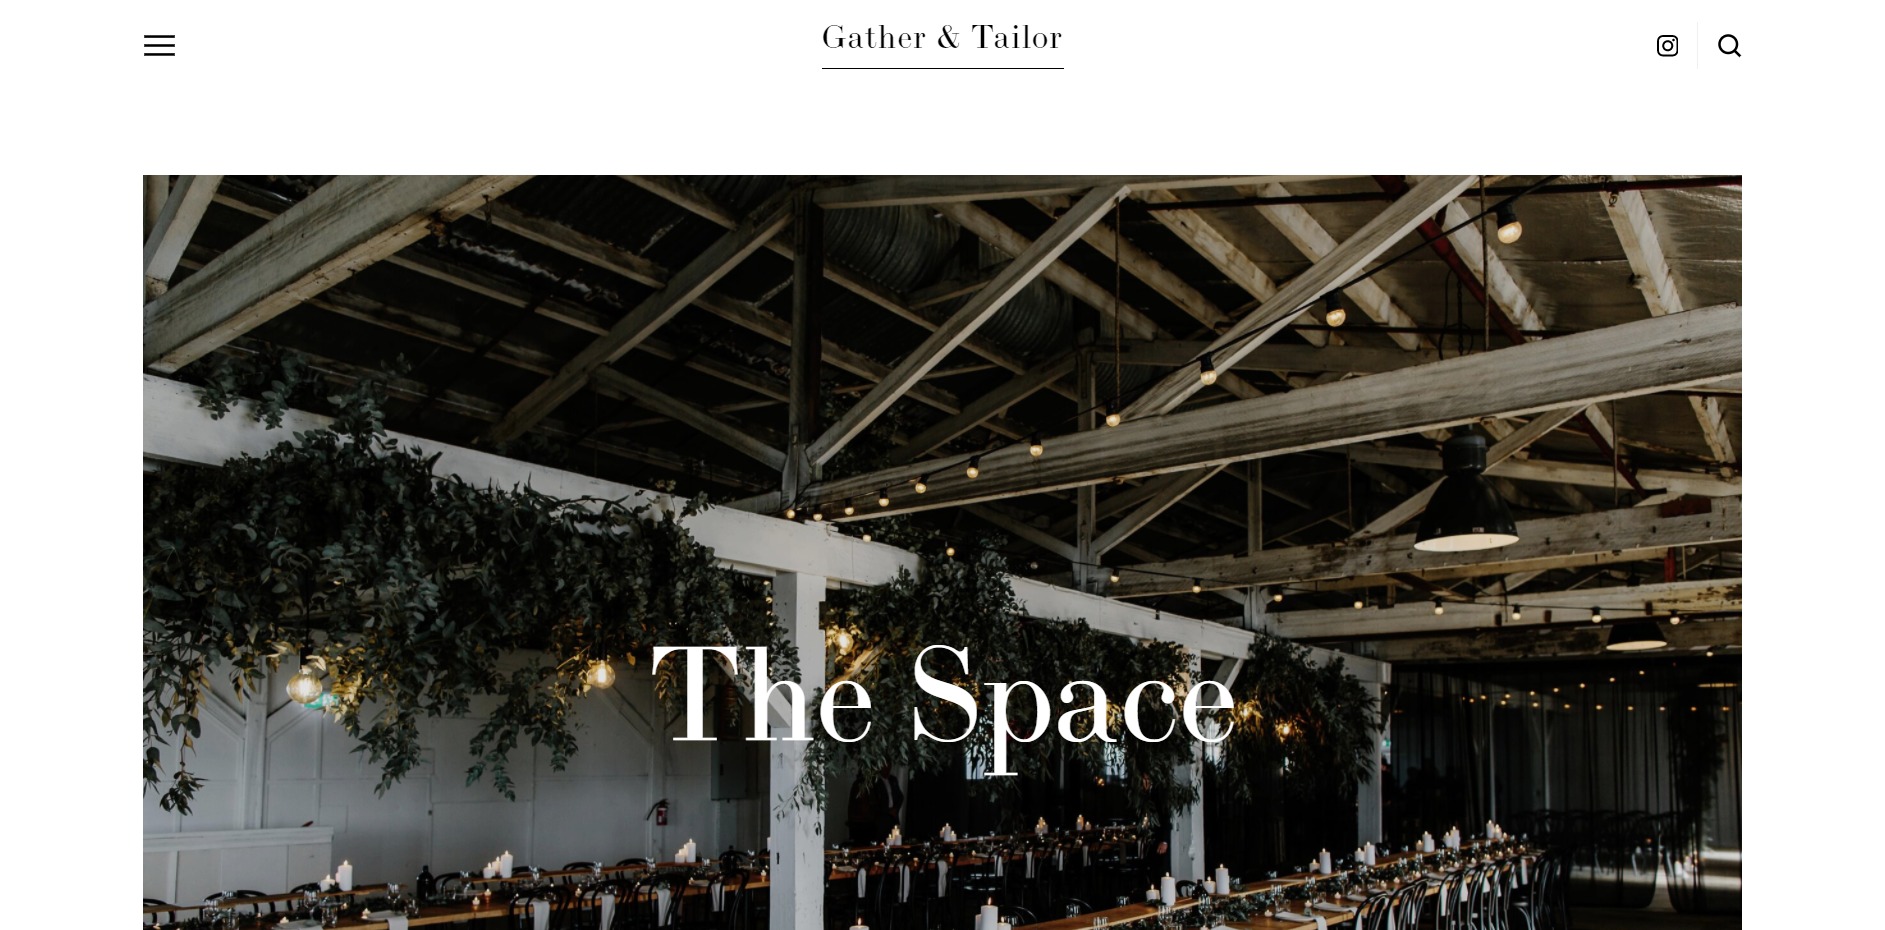 Gather & Tailor